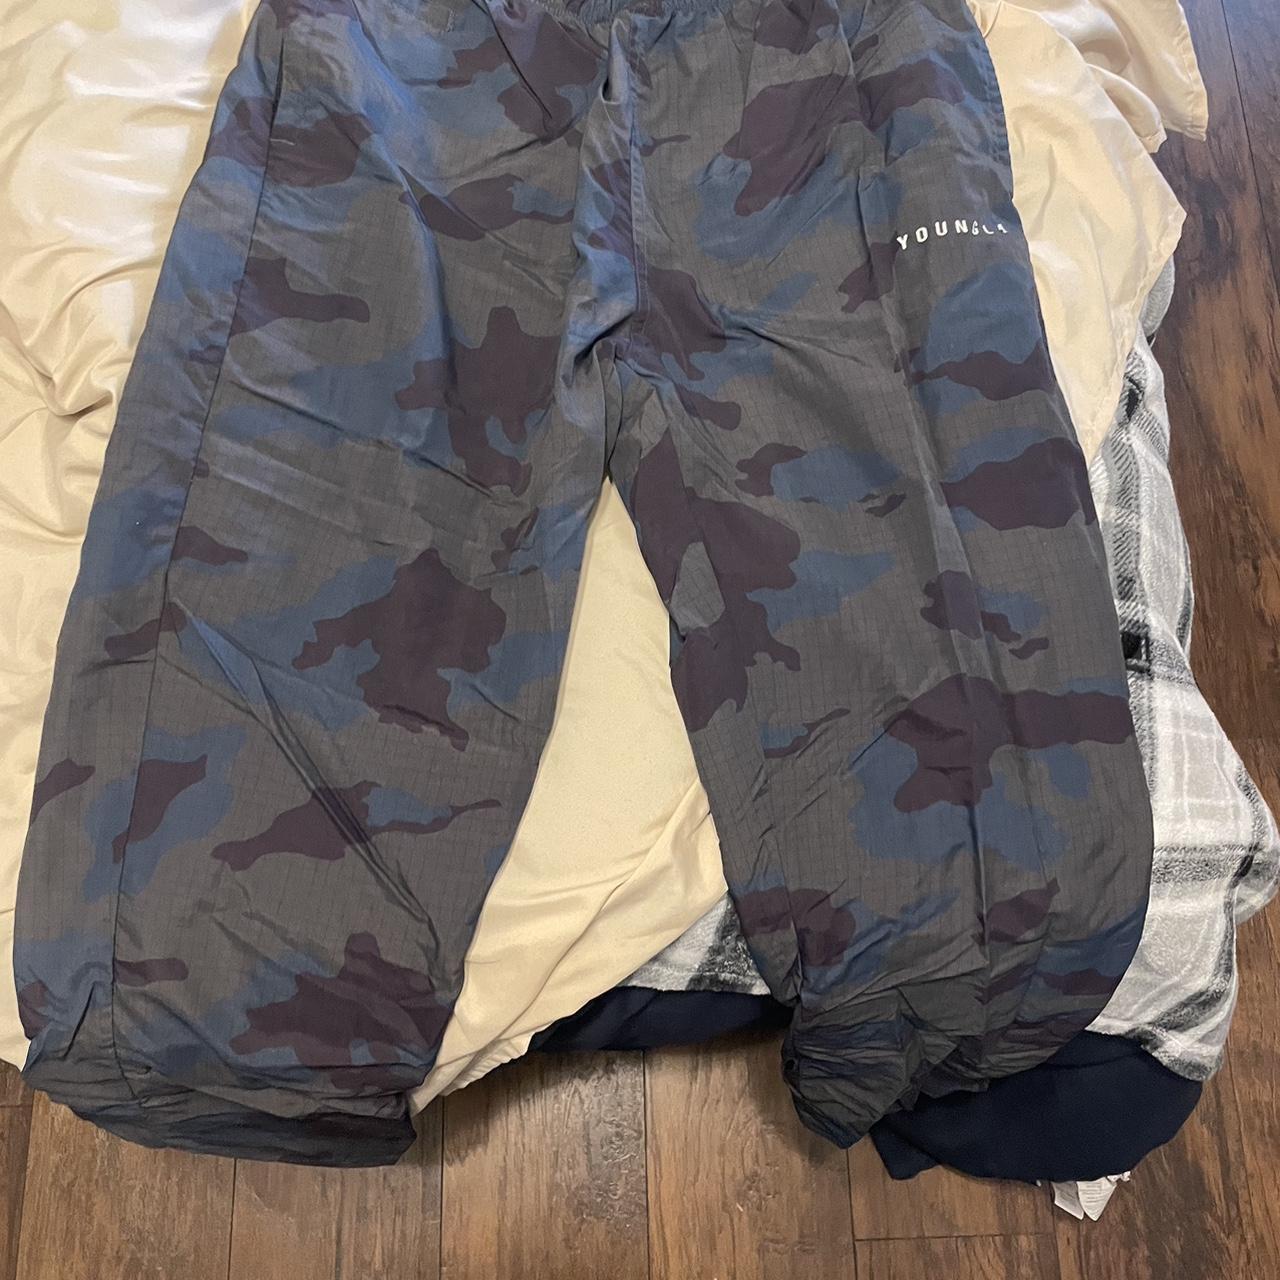 Young la 201 OFF THE GRID PANTS Worn twice, no rips - Depop